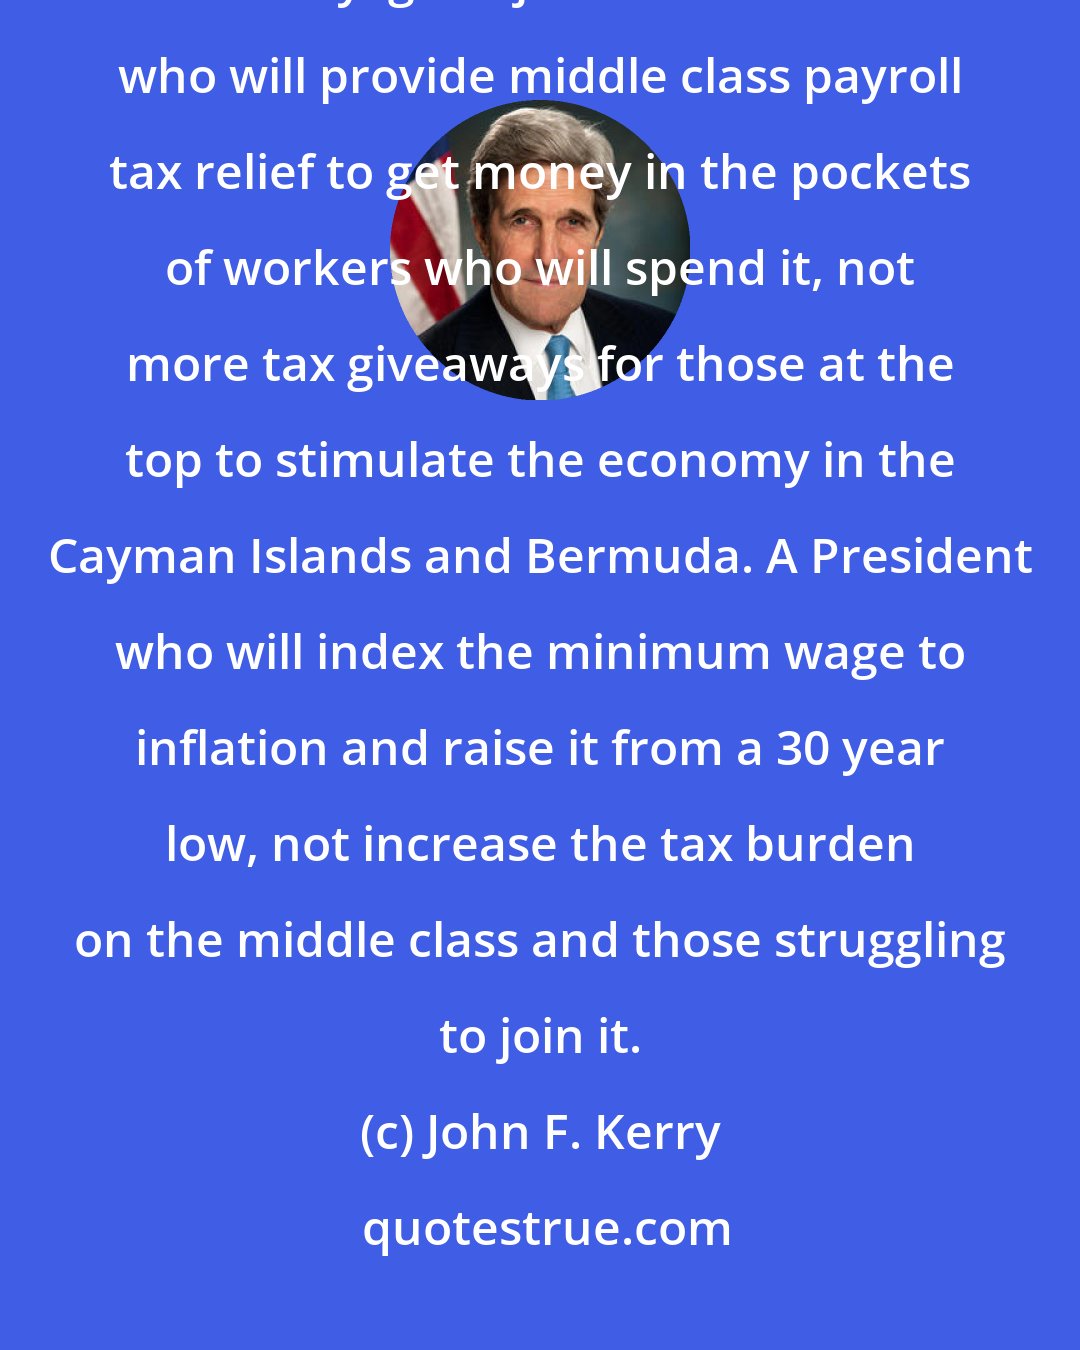 John F. Kerry: I think it's time we had a President who will provide the only real economic security: good jobs. A President who will provide middle class payroll tax relief to get money in the pockets of workers who will spend it, not more tax giveaways for those at the top to stimulate the economy in the Cayman Islands and Bermuda. A President who will index the minimum wage to inflation and raise it from a 30 year low, not increase the tax burden on the middle class and those struggling to join it.